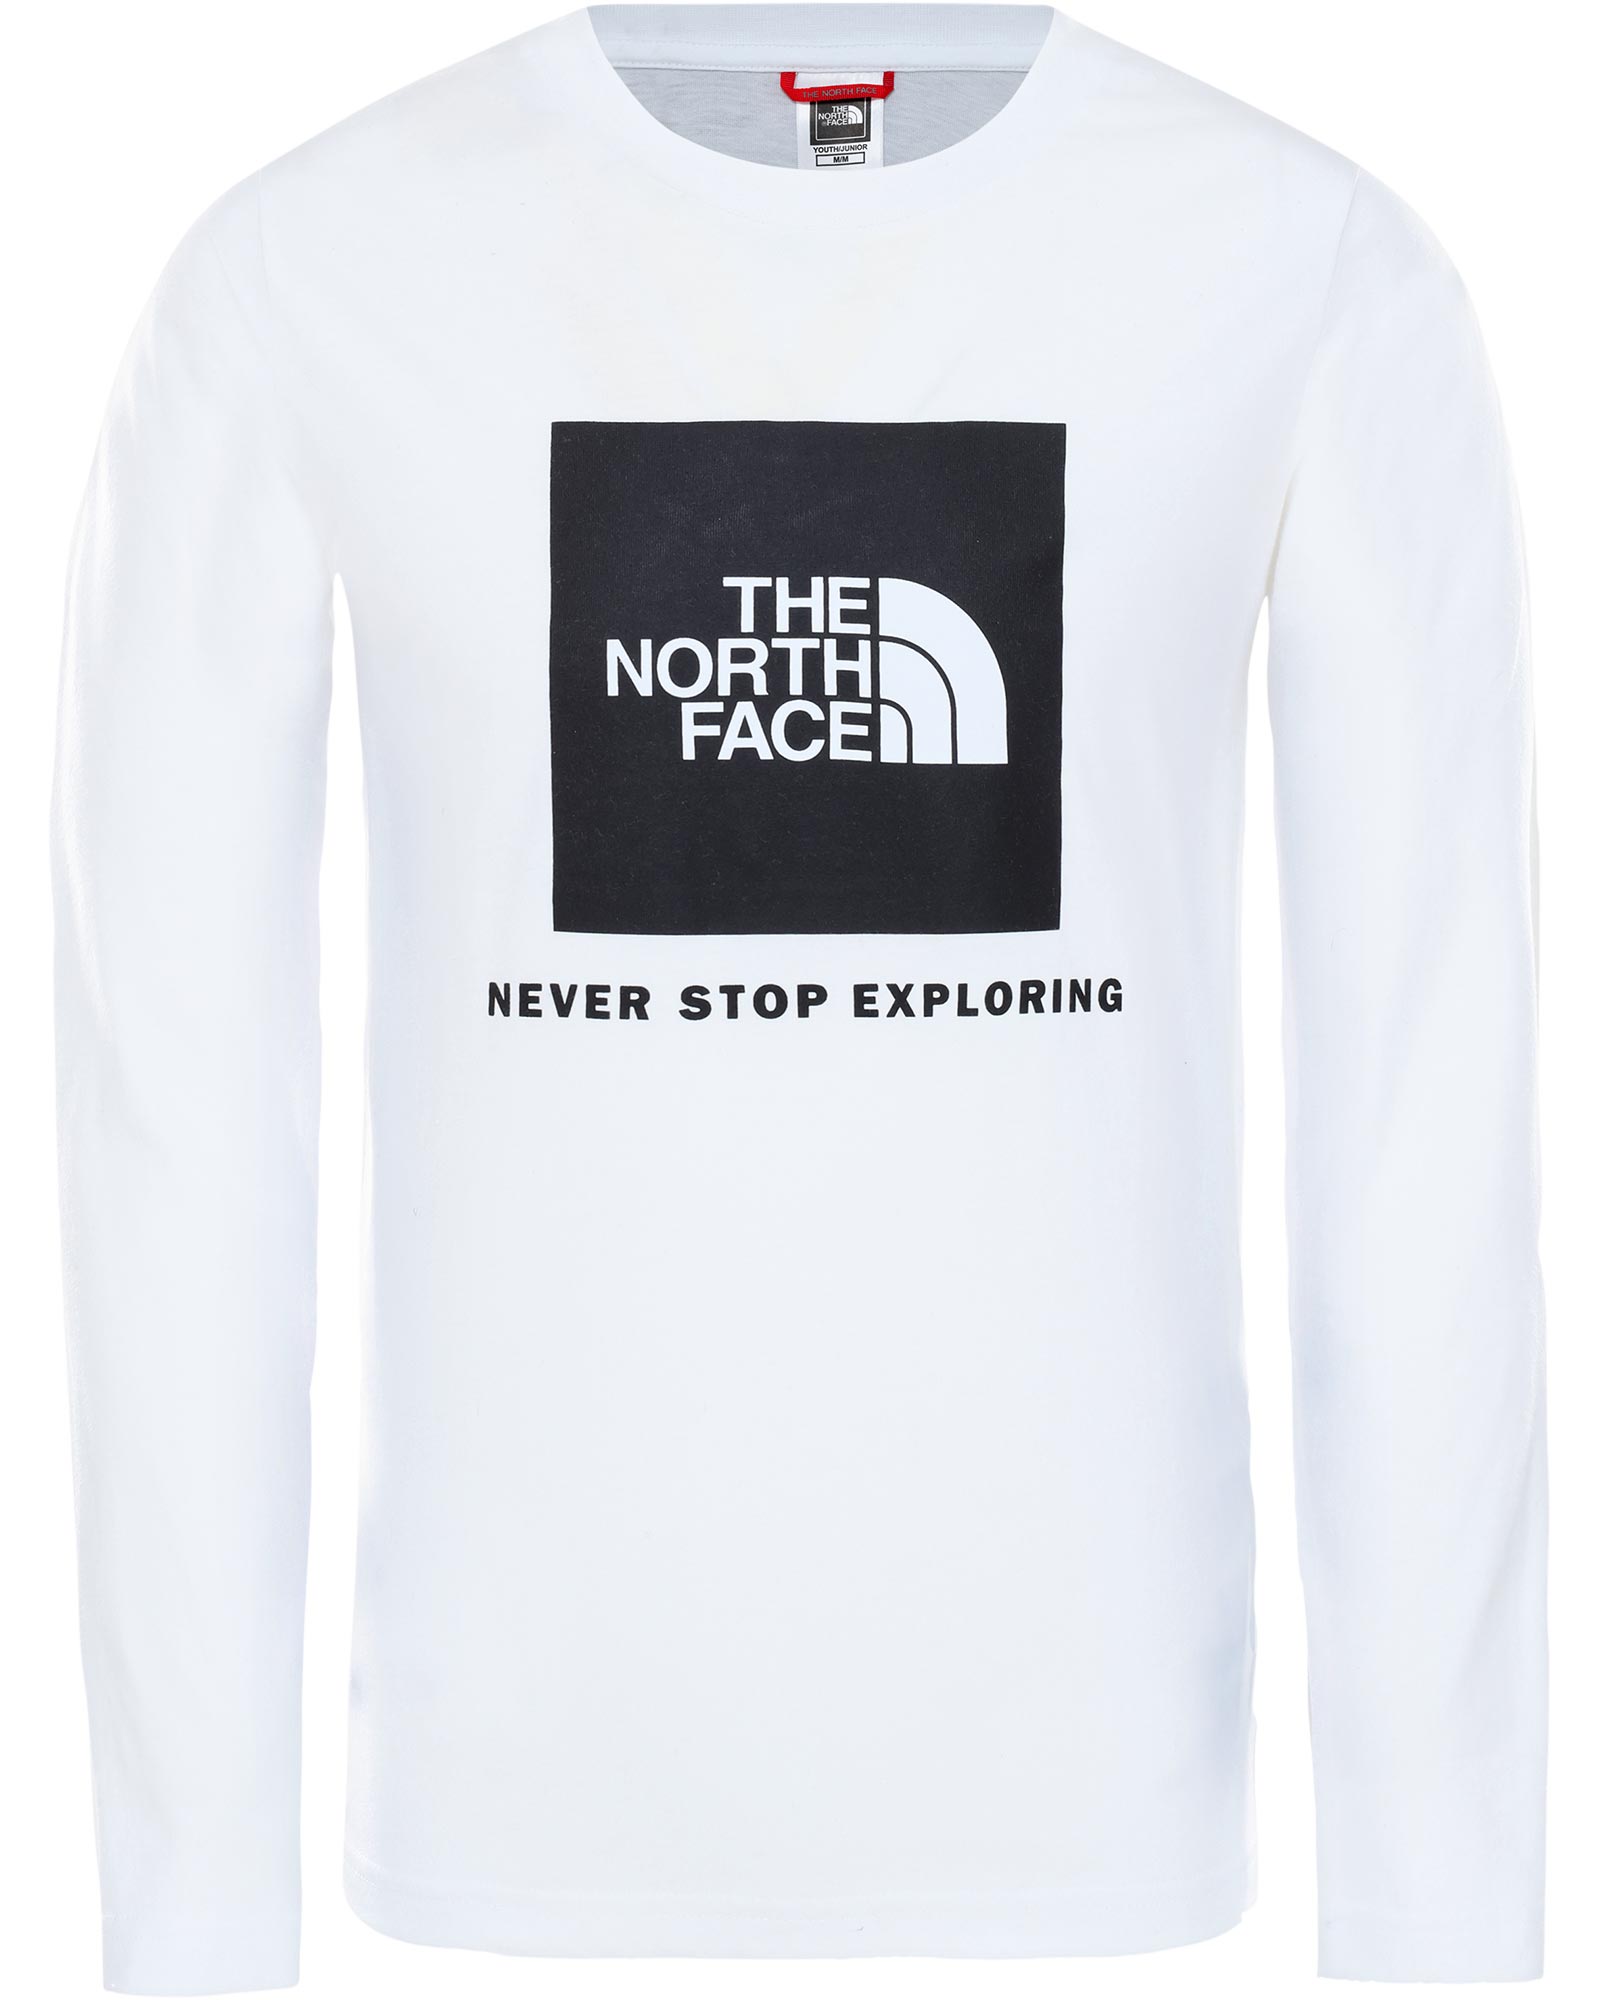 The North Face Box Kids’ Long Sleeve T Shirt - TNF White S